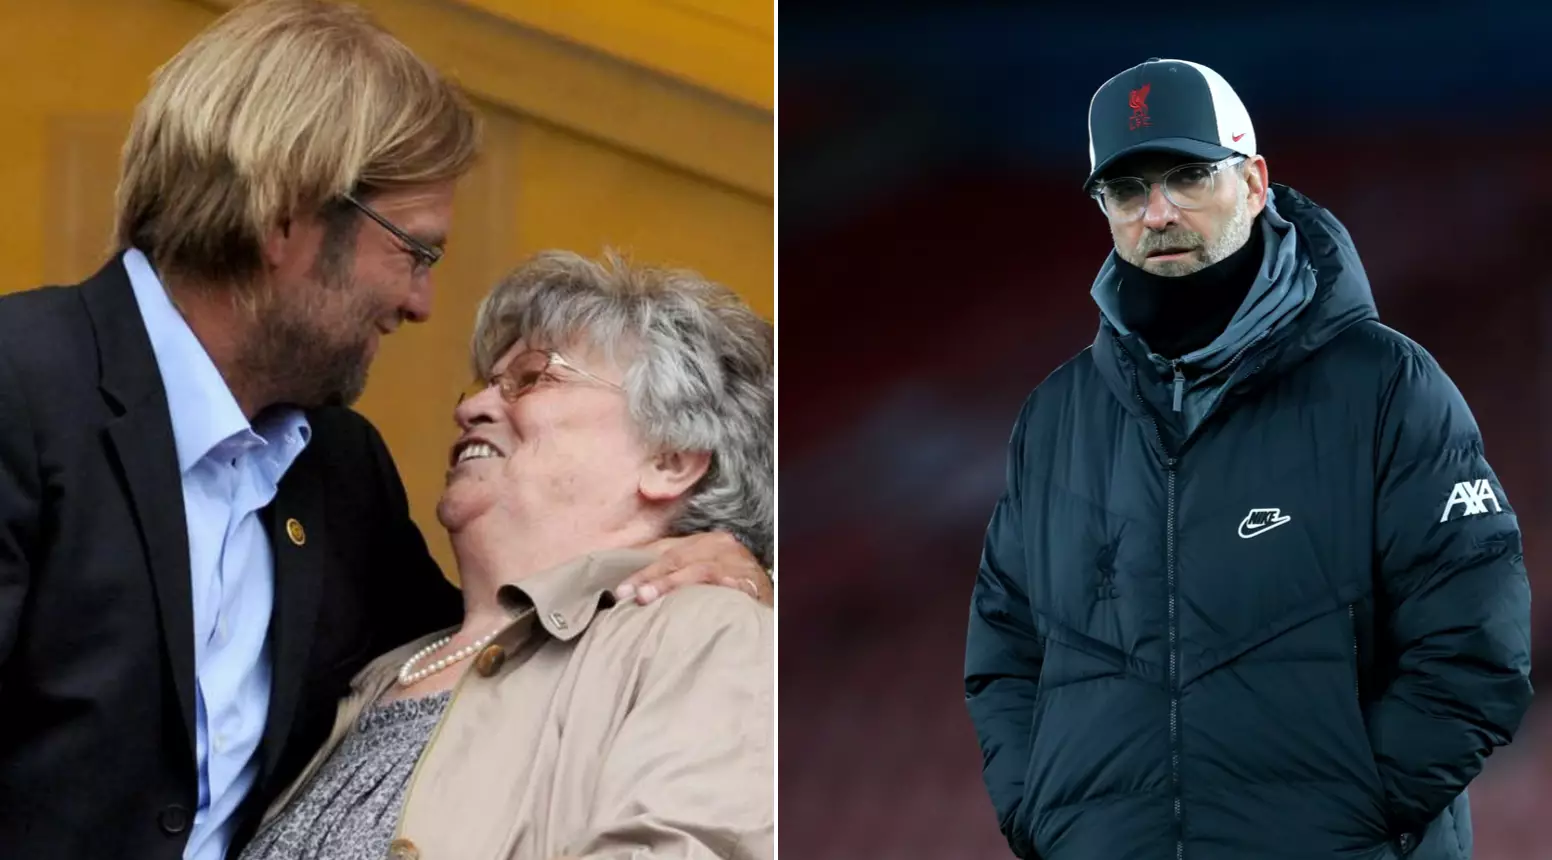 Jurgen Klopp Devastated After Death Of His Mother, Forced To Miss Funeral